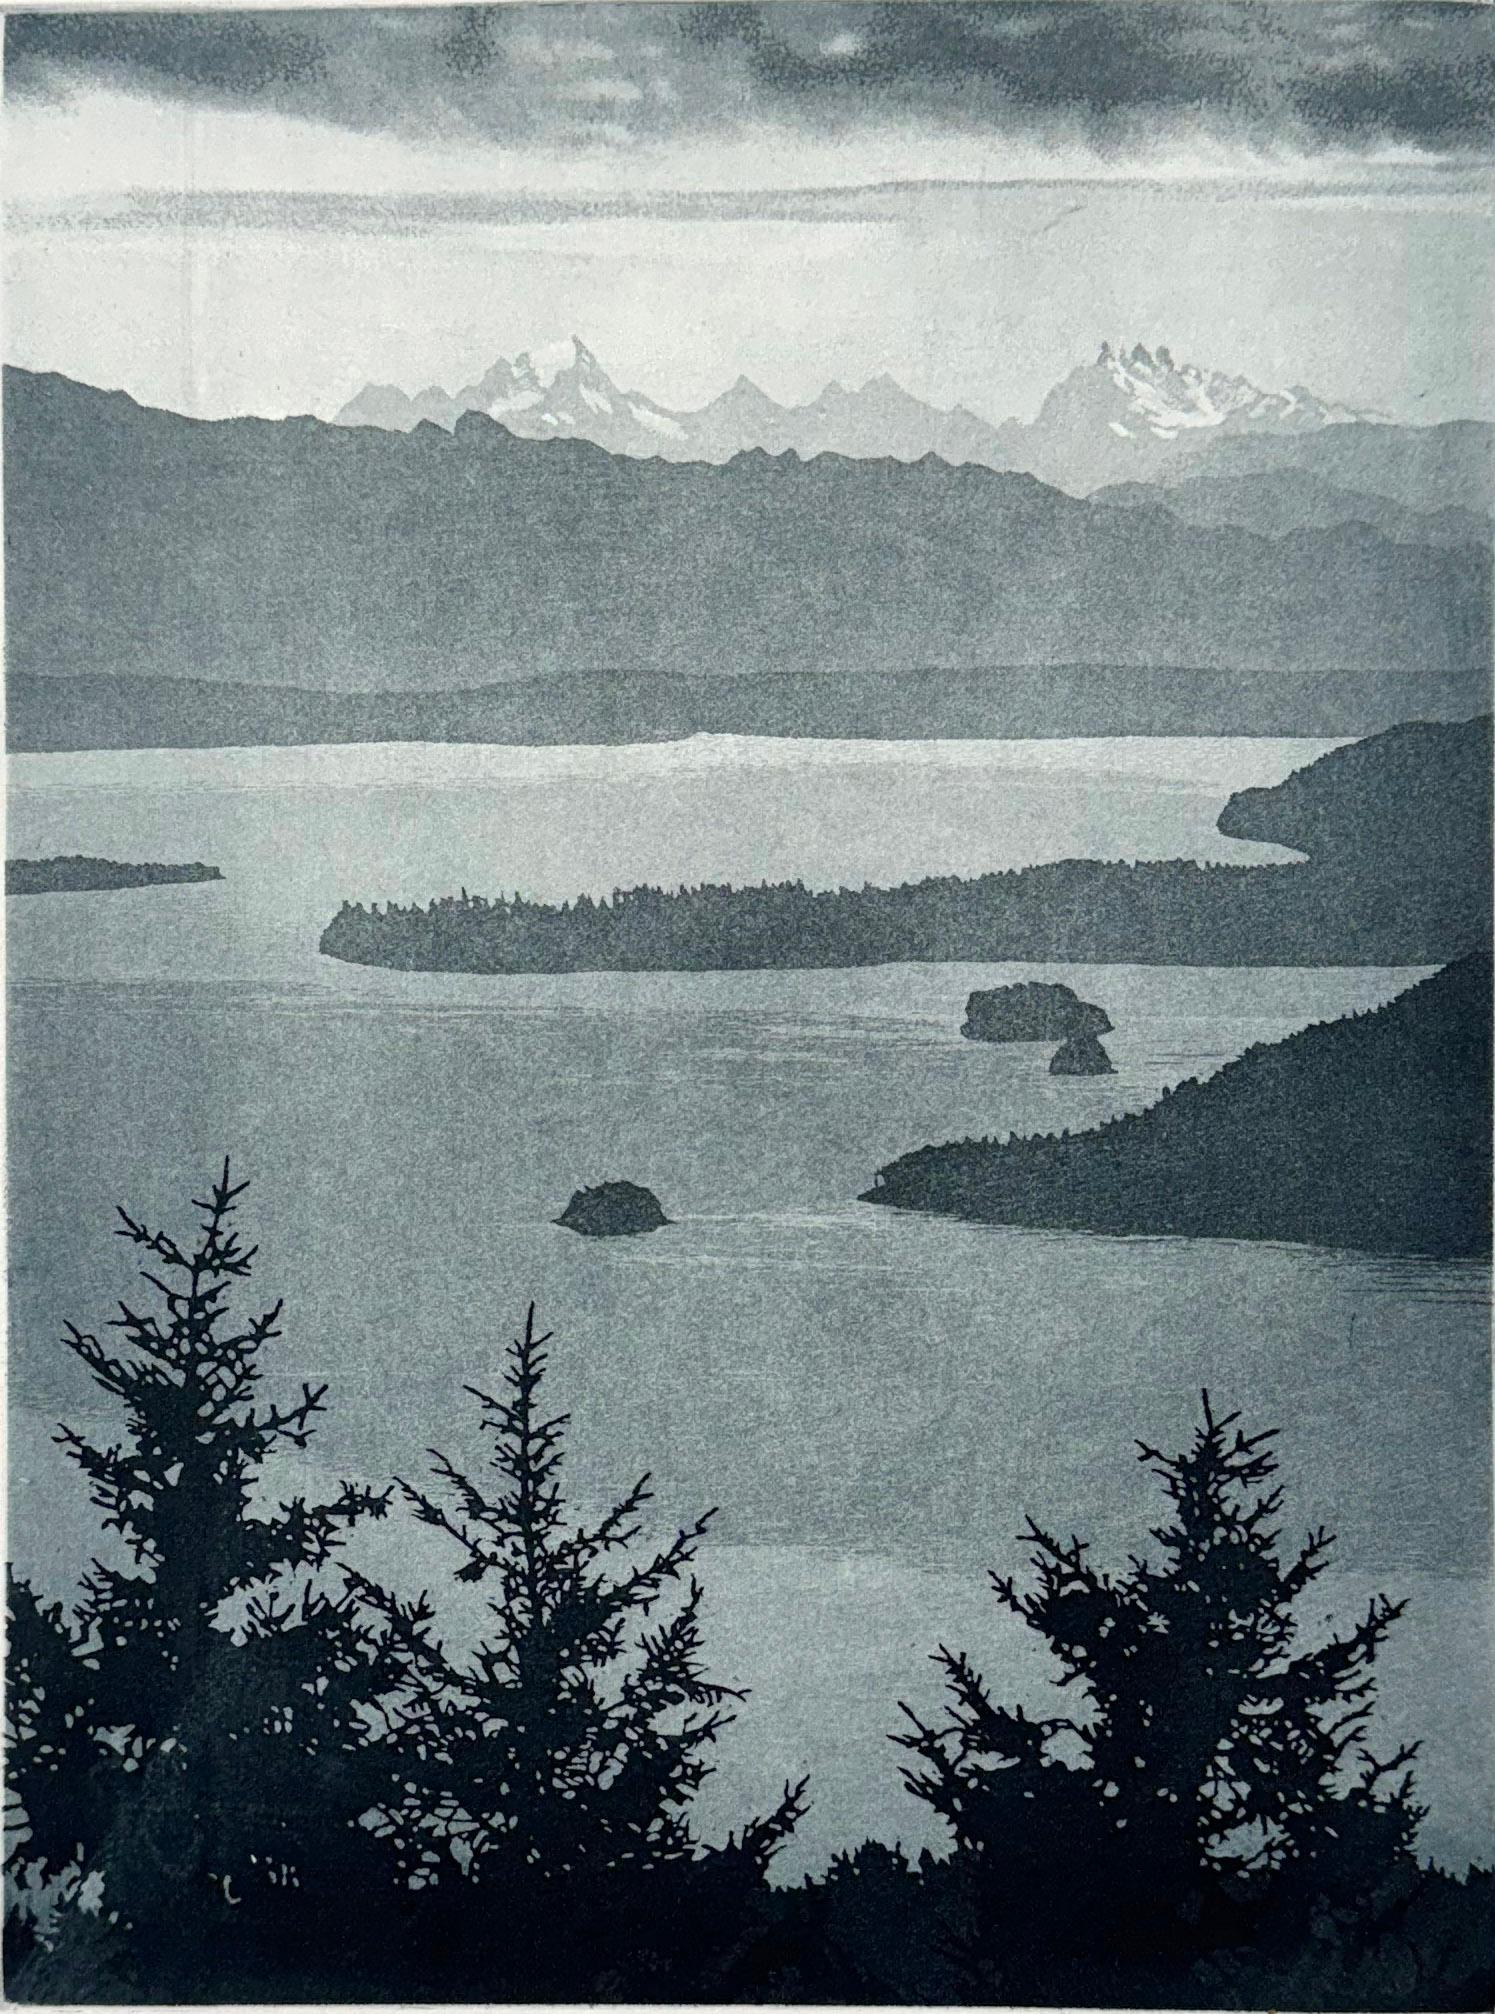 Signed, titled and numbered by the artist.
Etching and aquatint, 12 x 8.5 inches.

The view  east from Orcas Island and San Juan Island in Washington highlights the type of mountain landscapes and seascapes for which McMillan is so well known.

Born